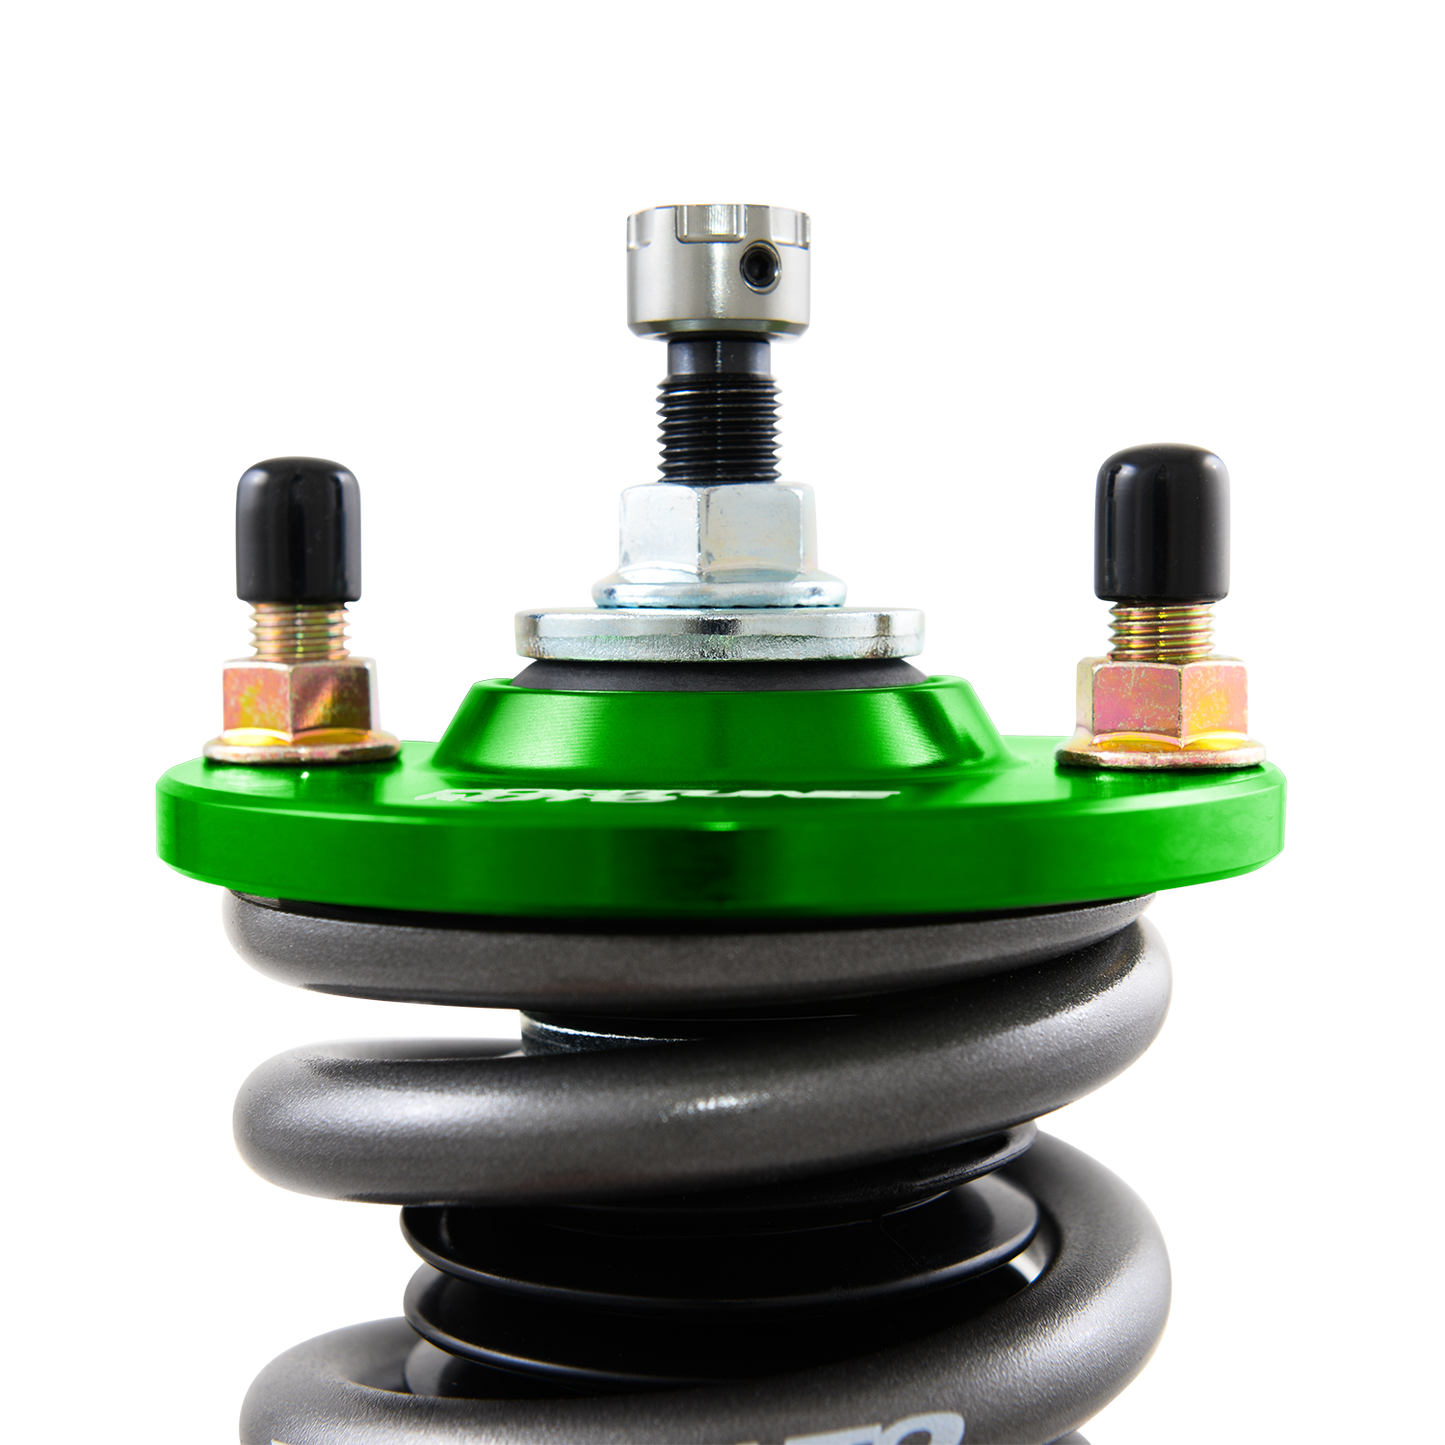 Dreadnought PRO 2-Way Coilovers, FD3S